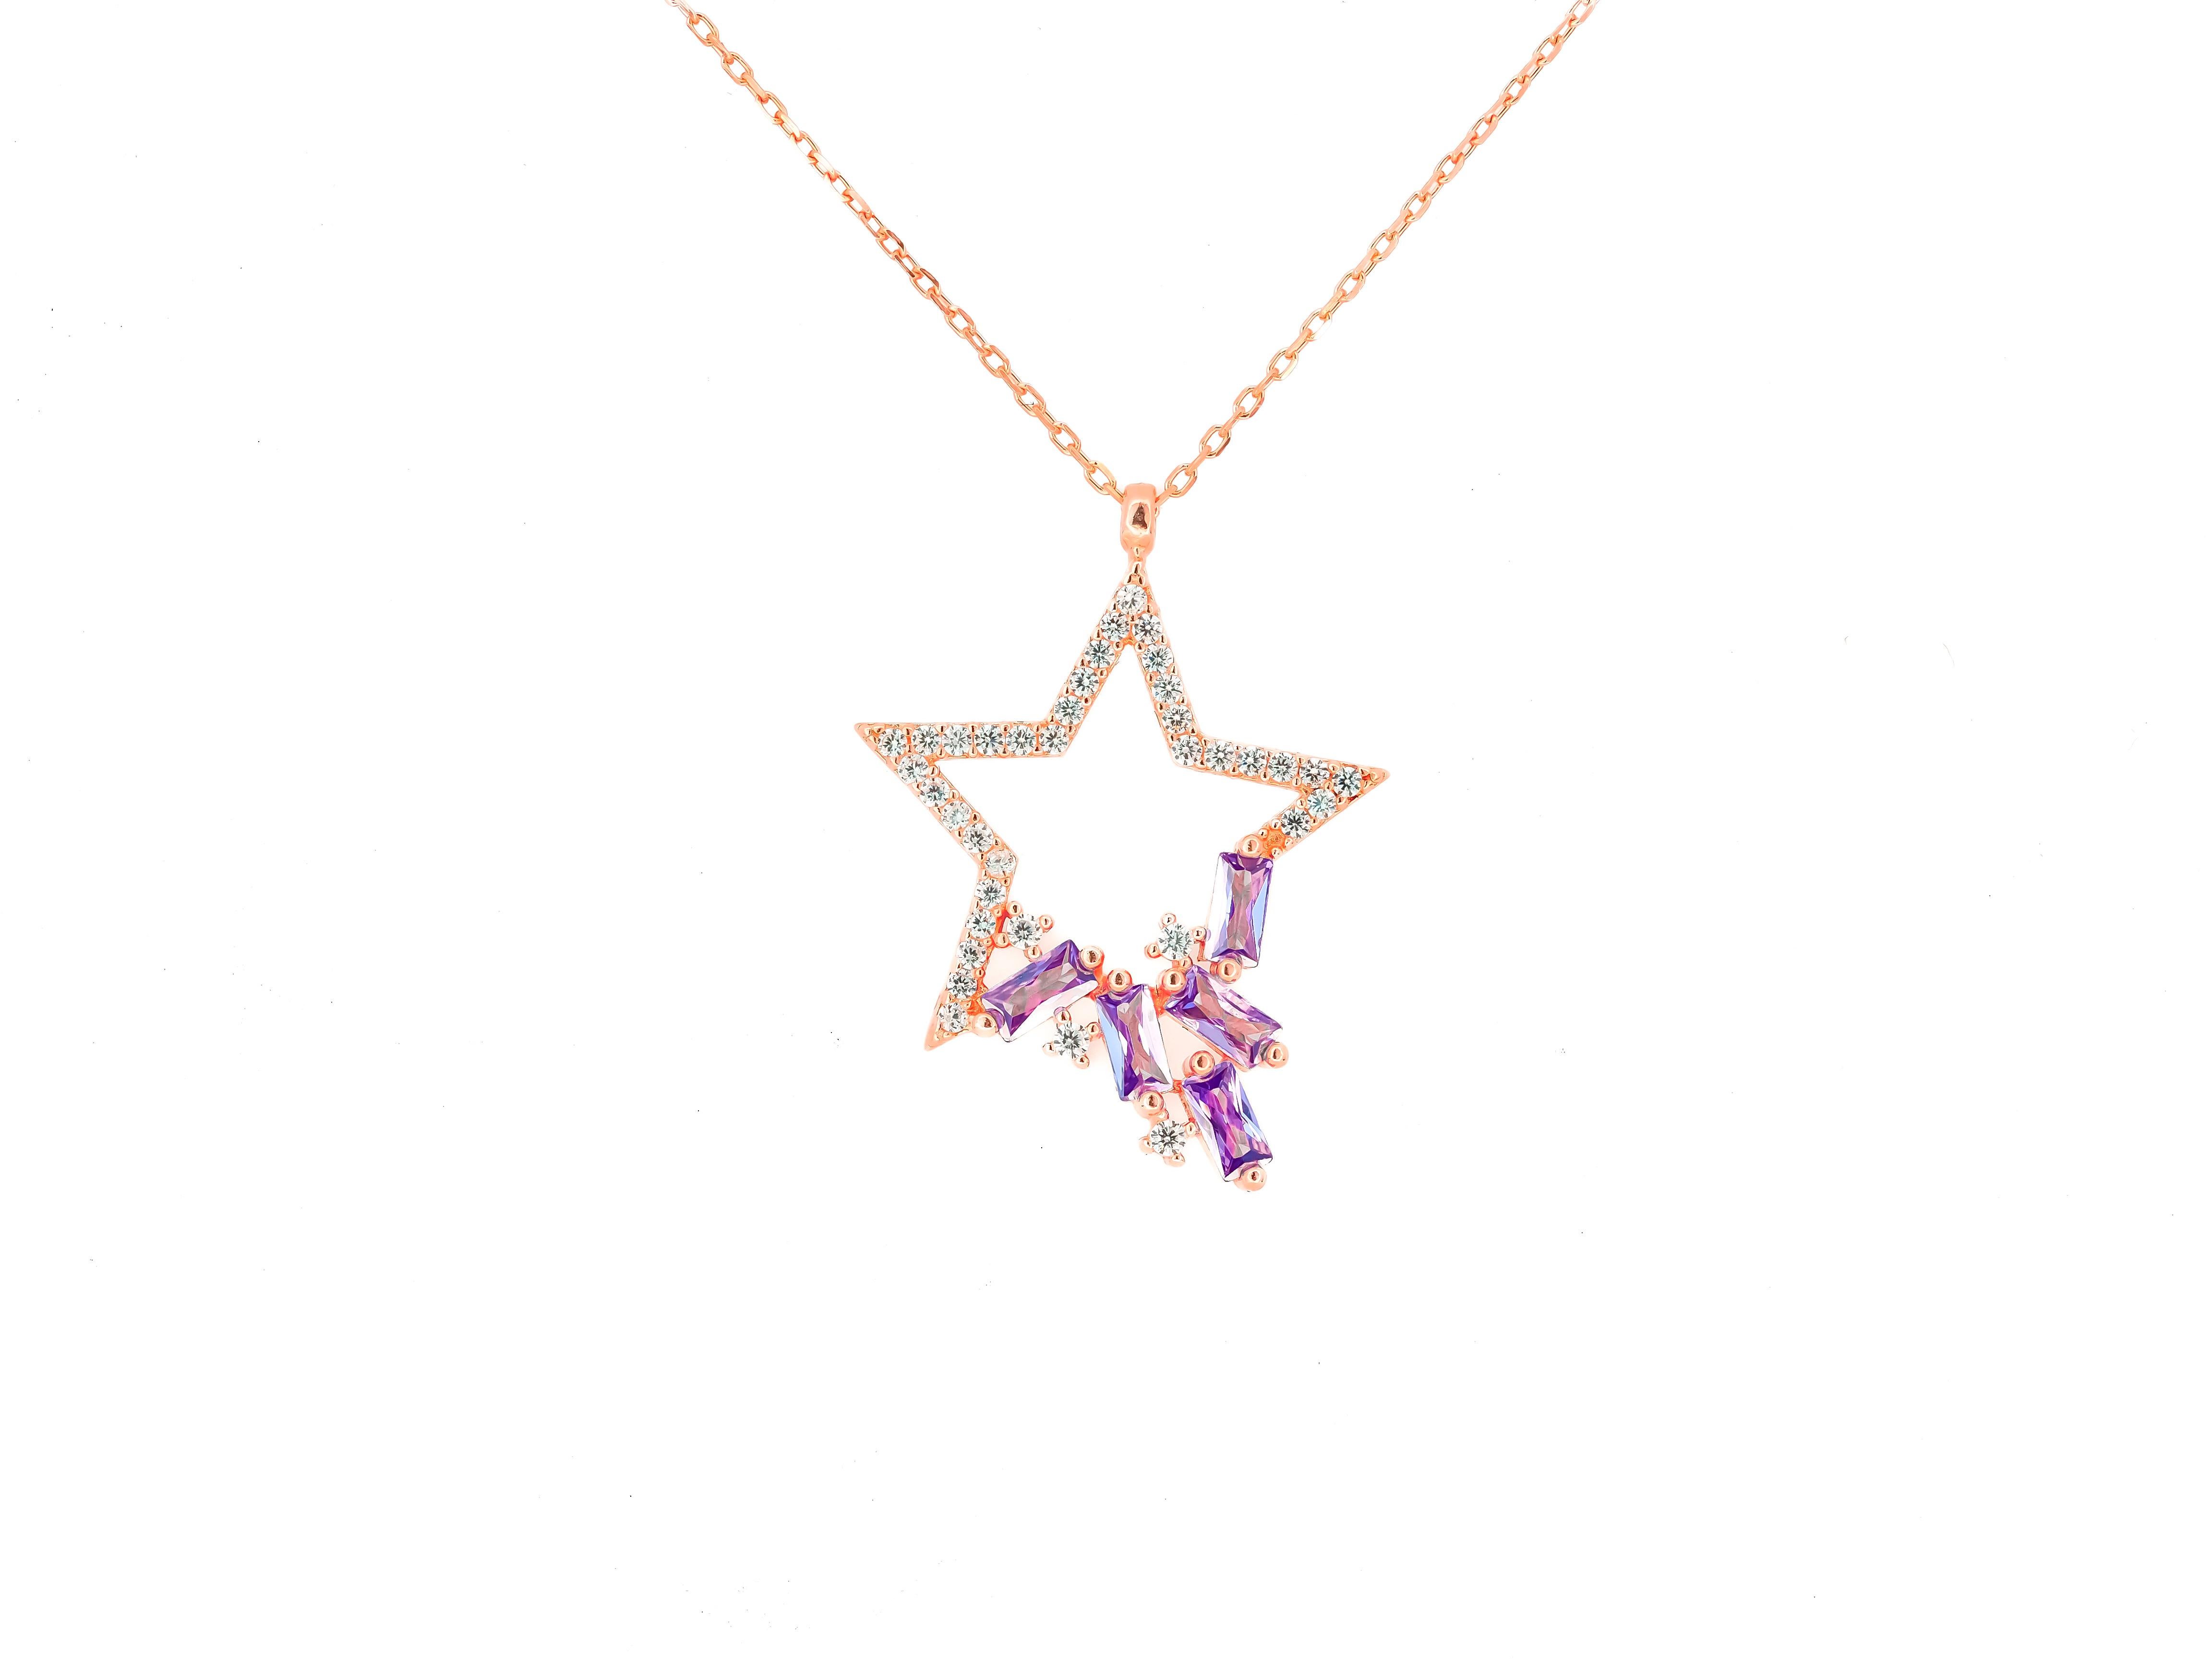 Star pendant with colored gemstones. Chain necklace with star pendant. 

Metal: silver 925, plated with 14k pink gold
Necklace lenght - 42 sm
Star pendant gemstones: white topazs, round cut - 1.2 ct 
Baguette cut amethysts, baguette cut - 5